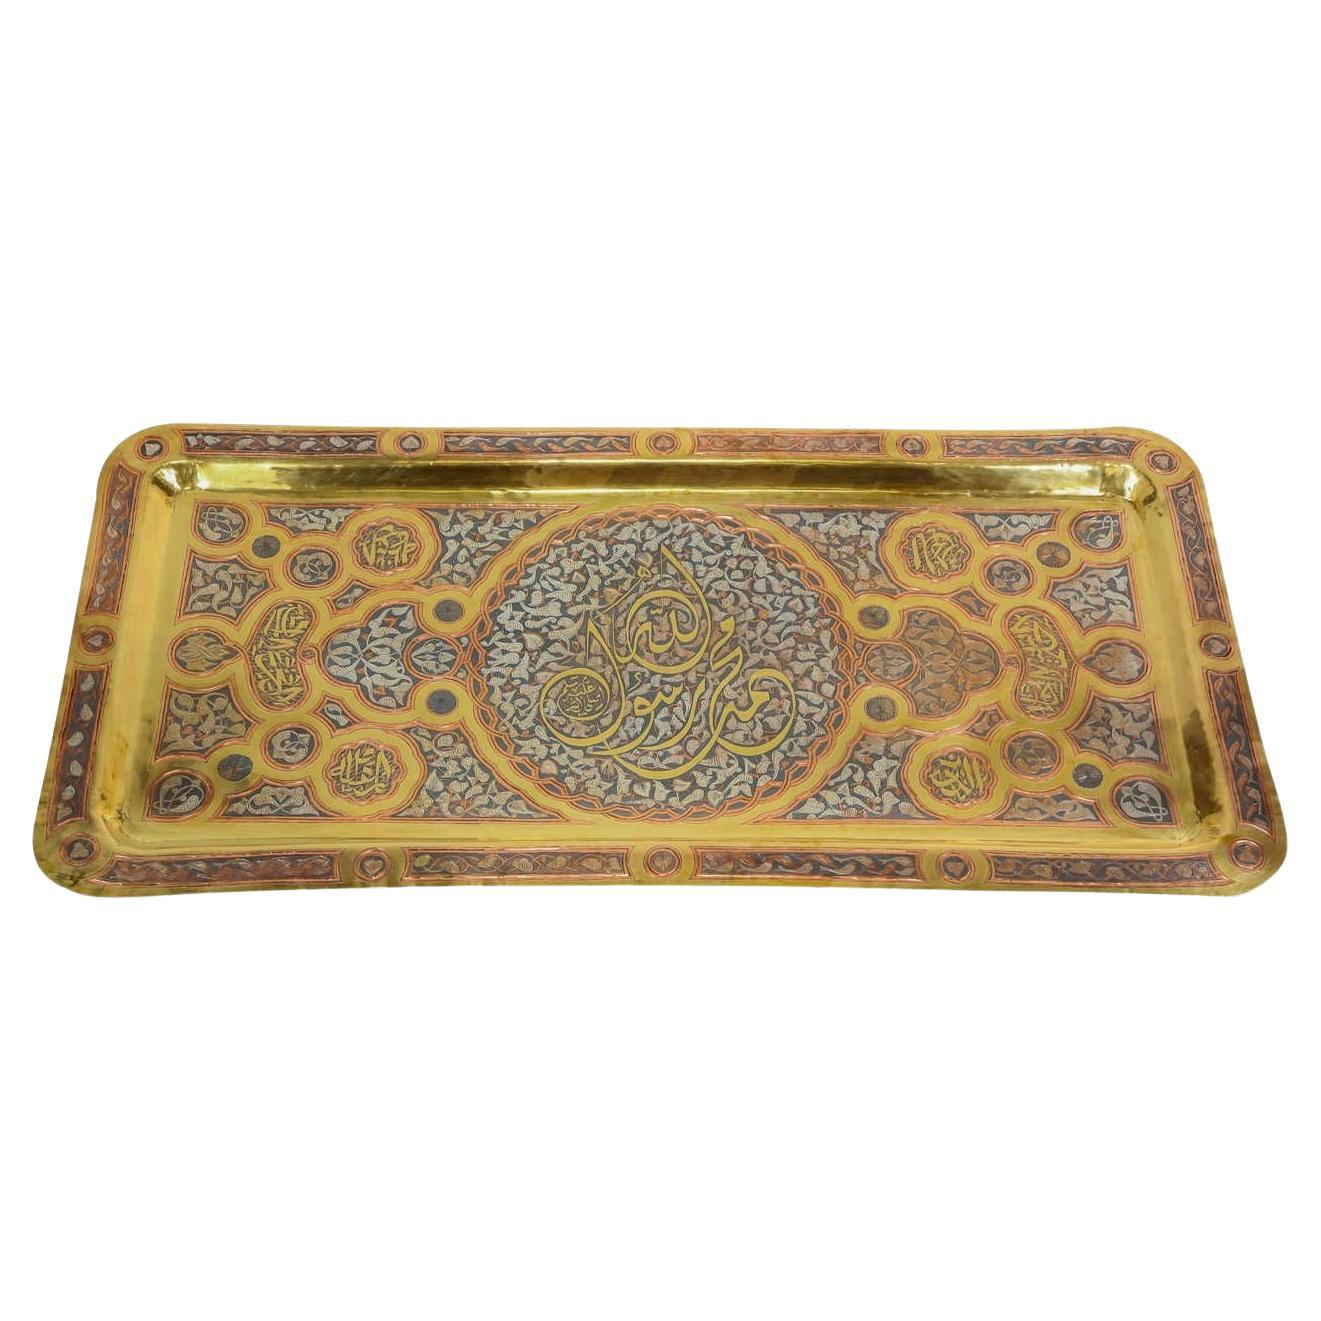 Antique Brass Tray with Arabic Koranic Calligraphy Writing Large Rectangular For Sale